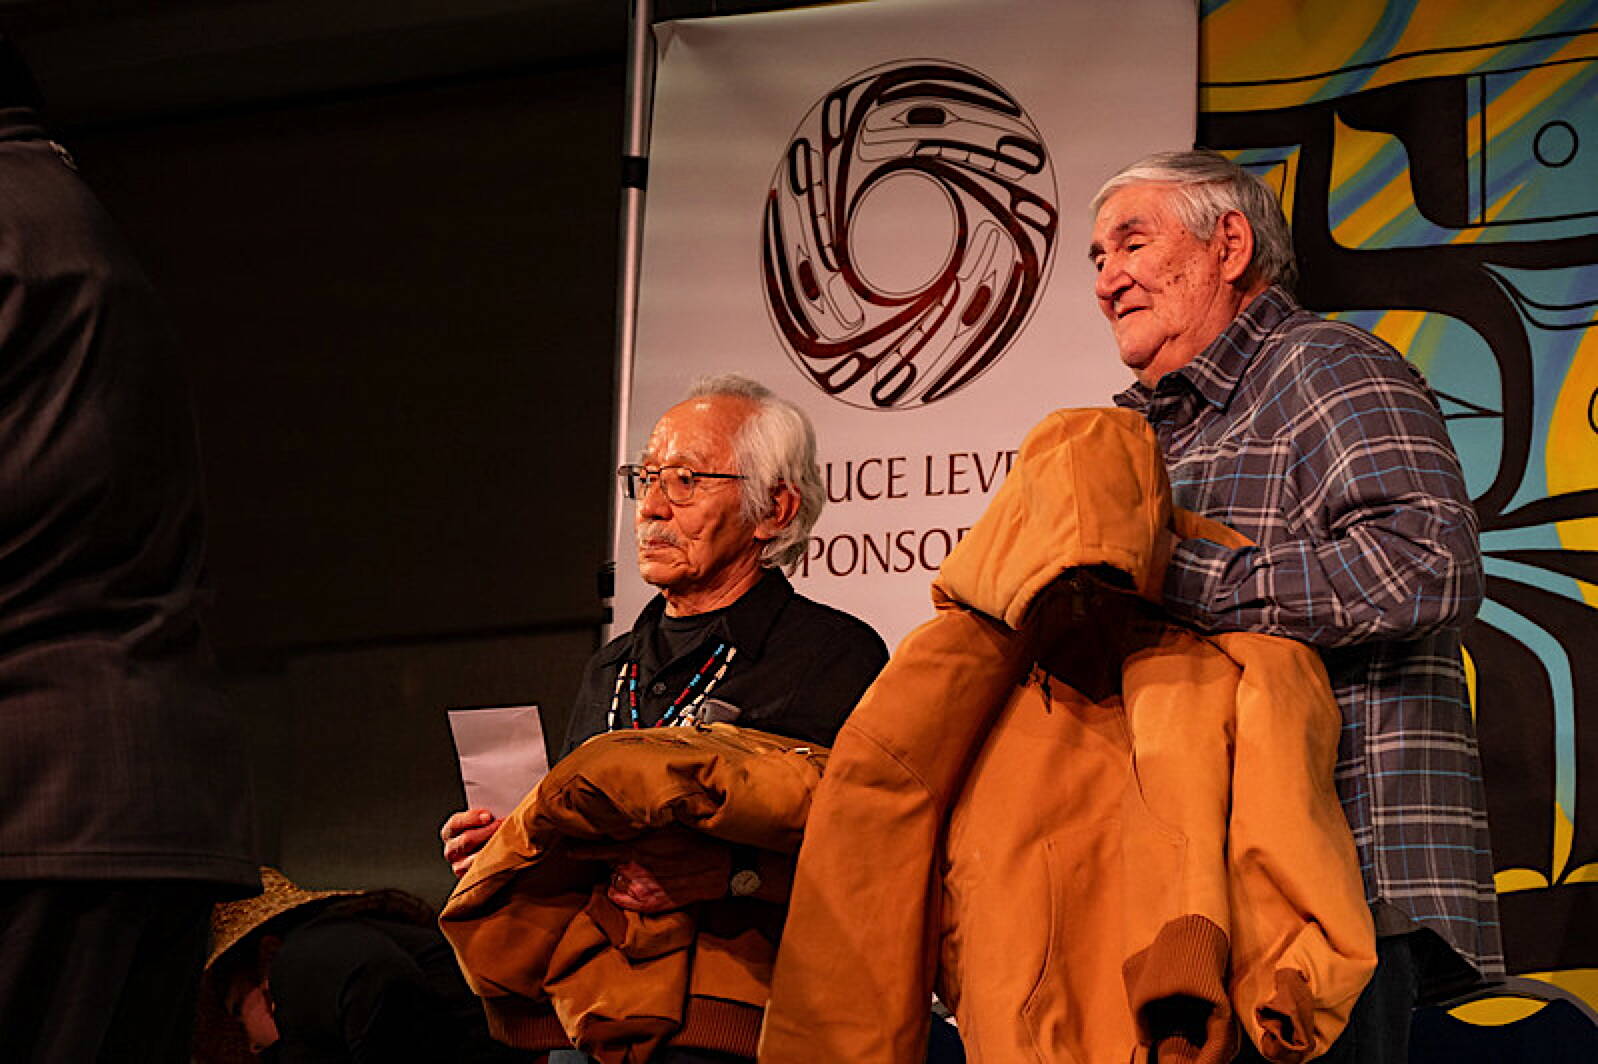 Nathan Jackson (left) and John Hagen accept awards at the Central Council of the Tlingit and Haida Indian Tribes of Alaska President’s Awards banquet. (Courtesy photo)